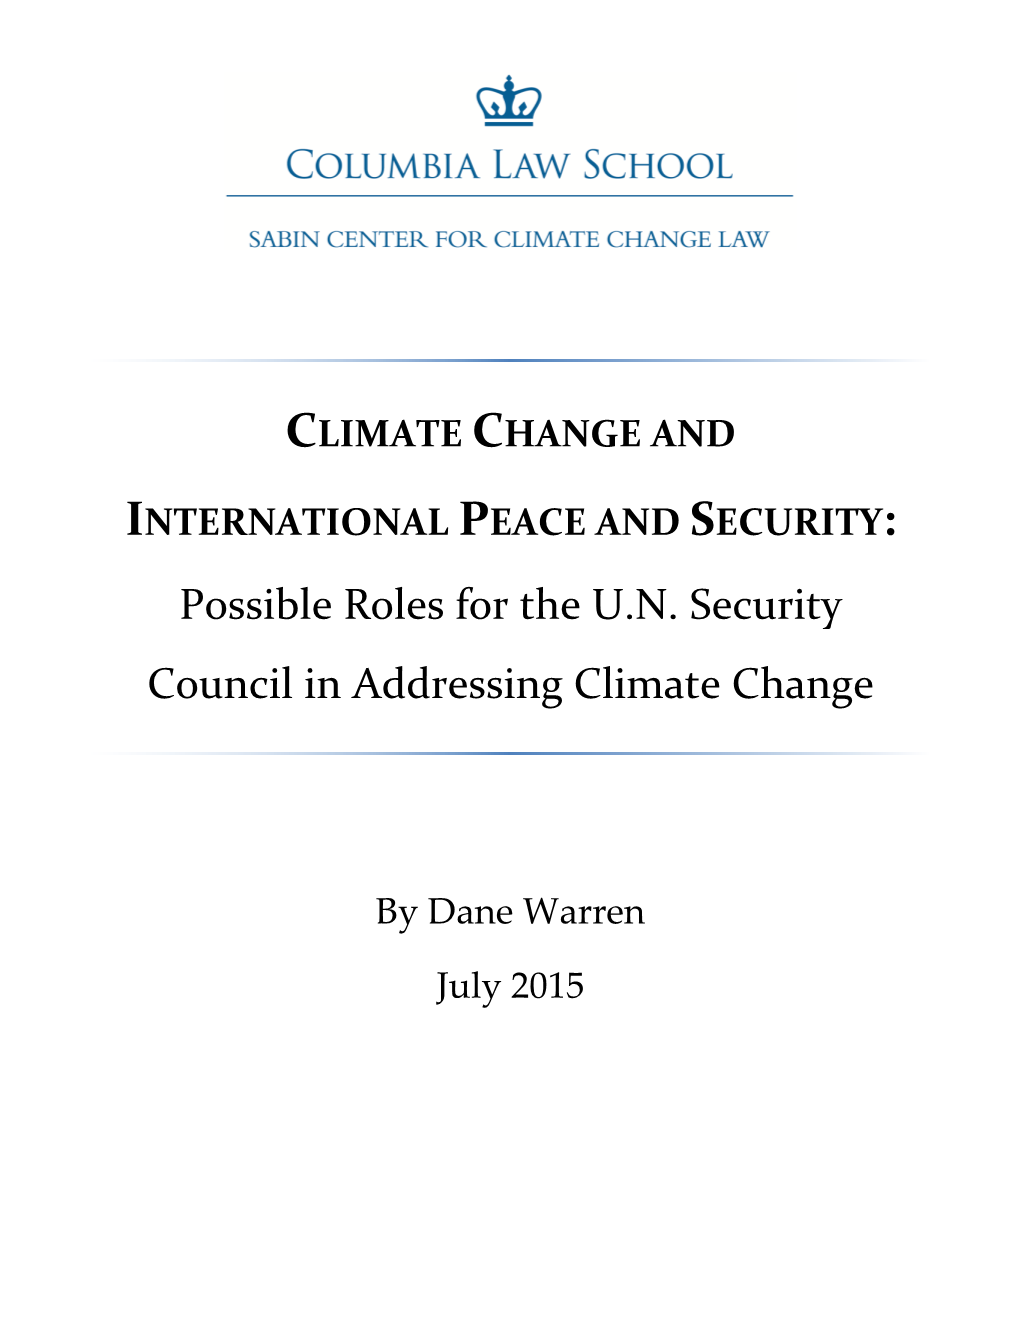 Possible Roles for the U.N. Security Council in Addressing Climate Change